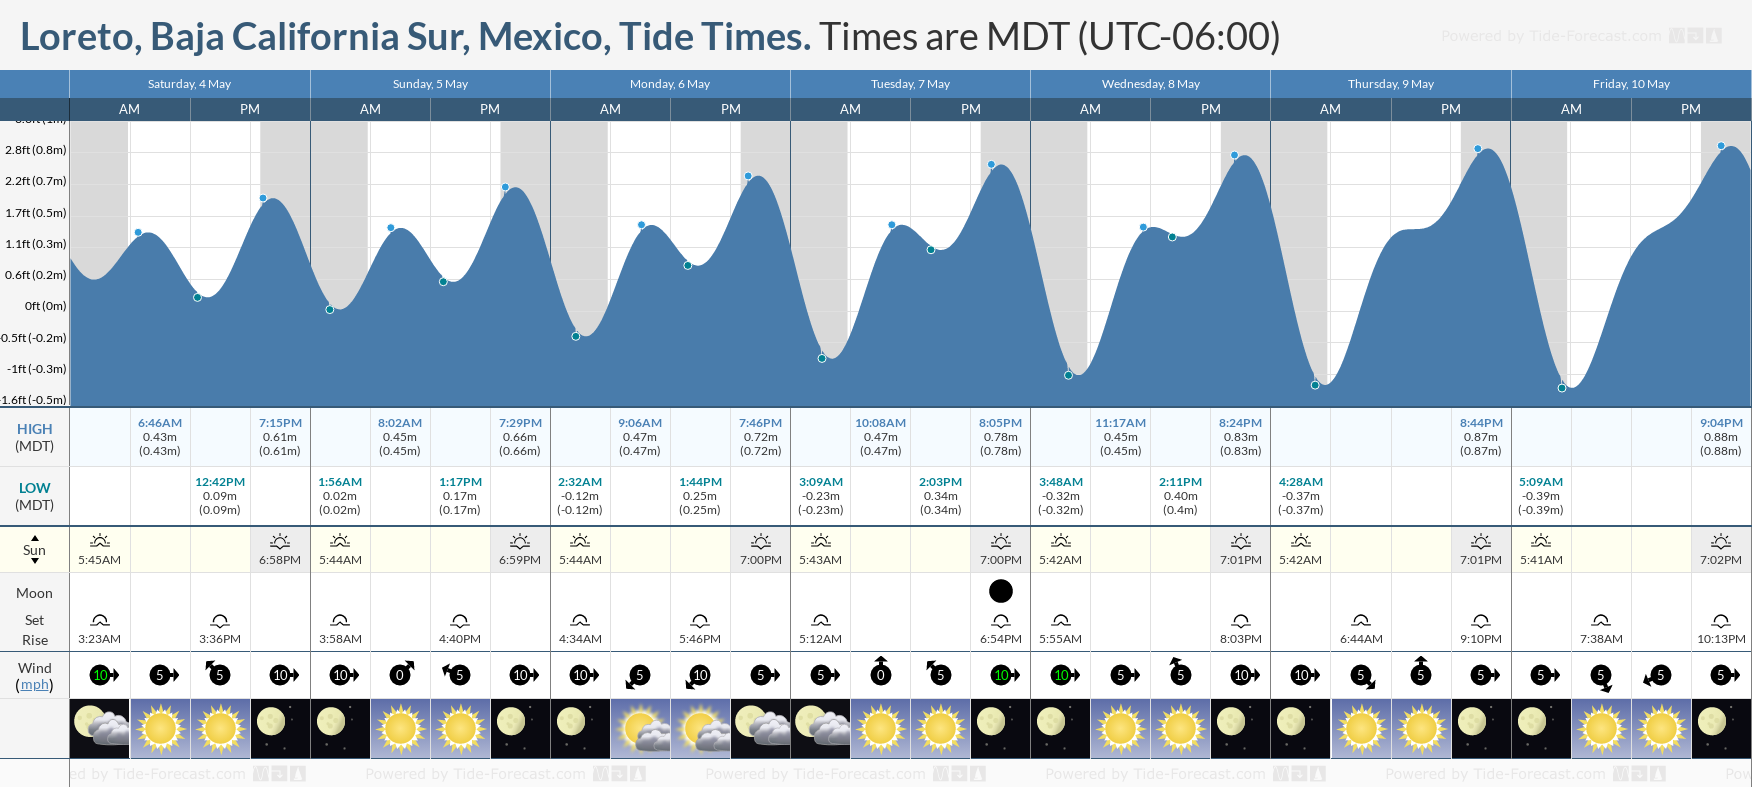 Loreto, Baja California Sur, Mexico Tide Chart including high and low tide tide times for the next 7 days